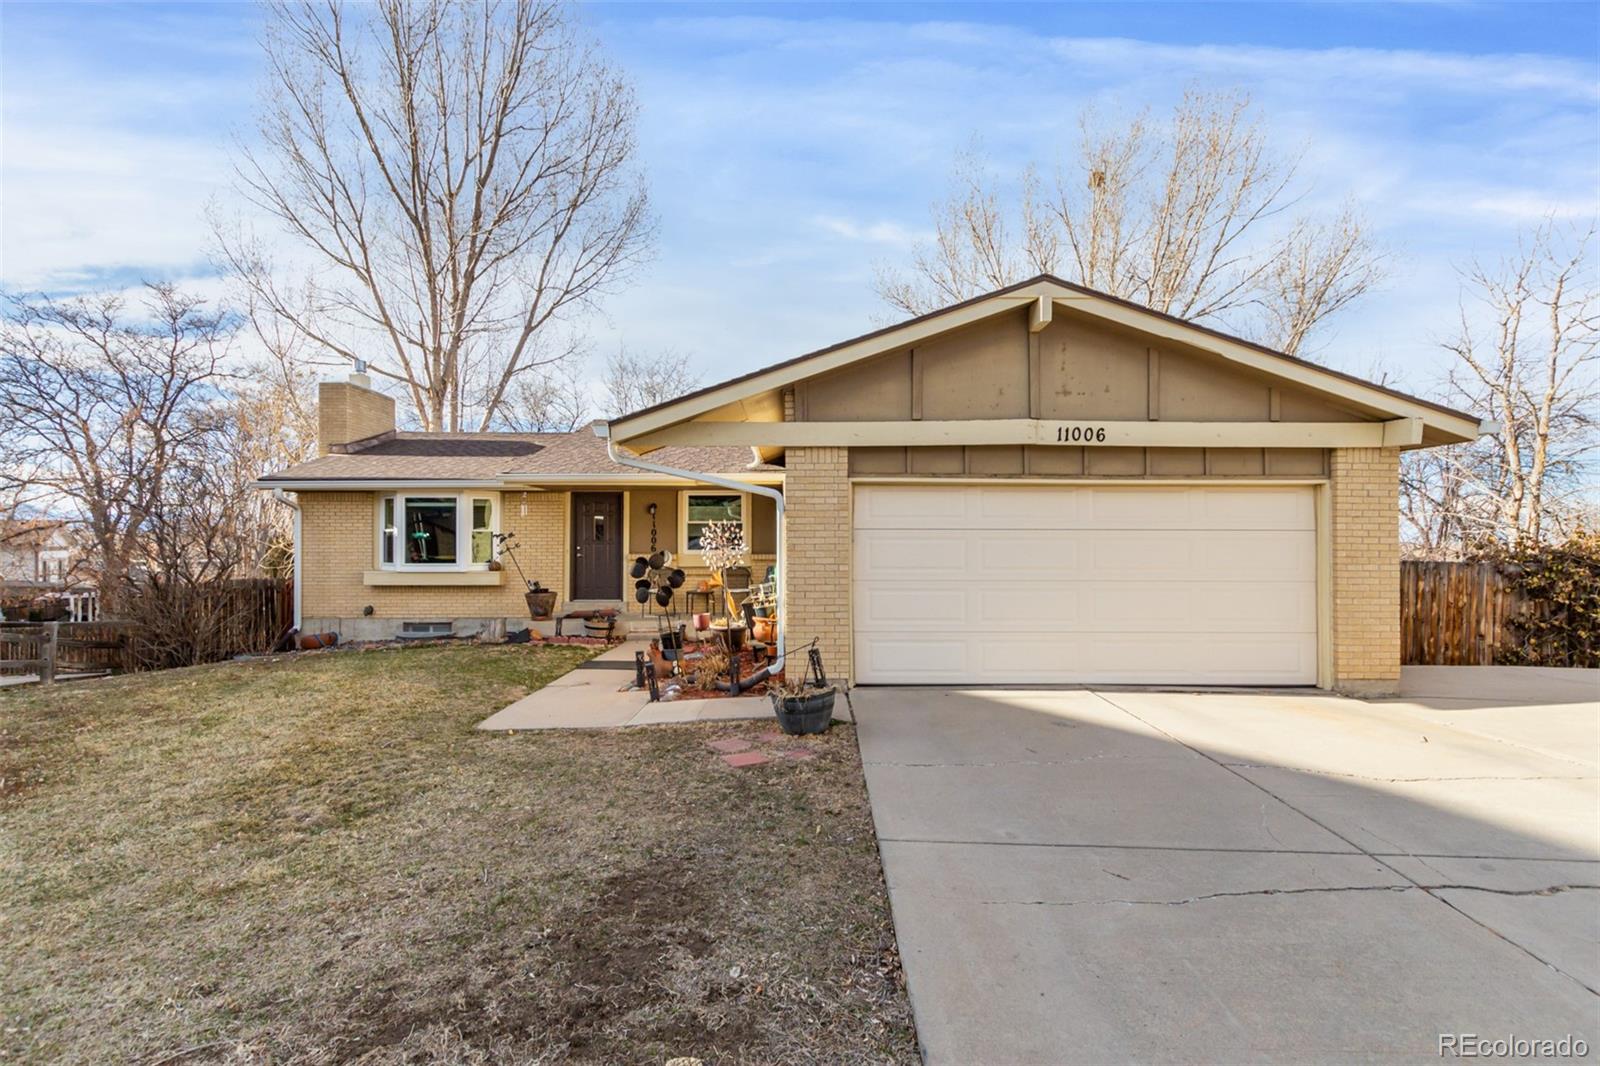 11006  Vrain Court, westminster MLS: 6174935 Beds: 5 Baths: 3 Price: $610,000